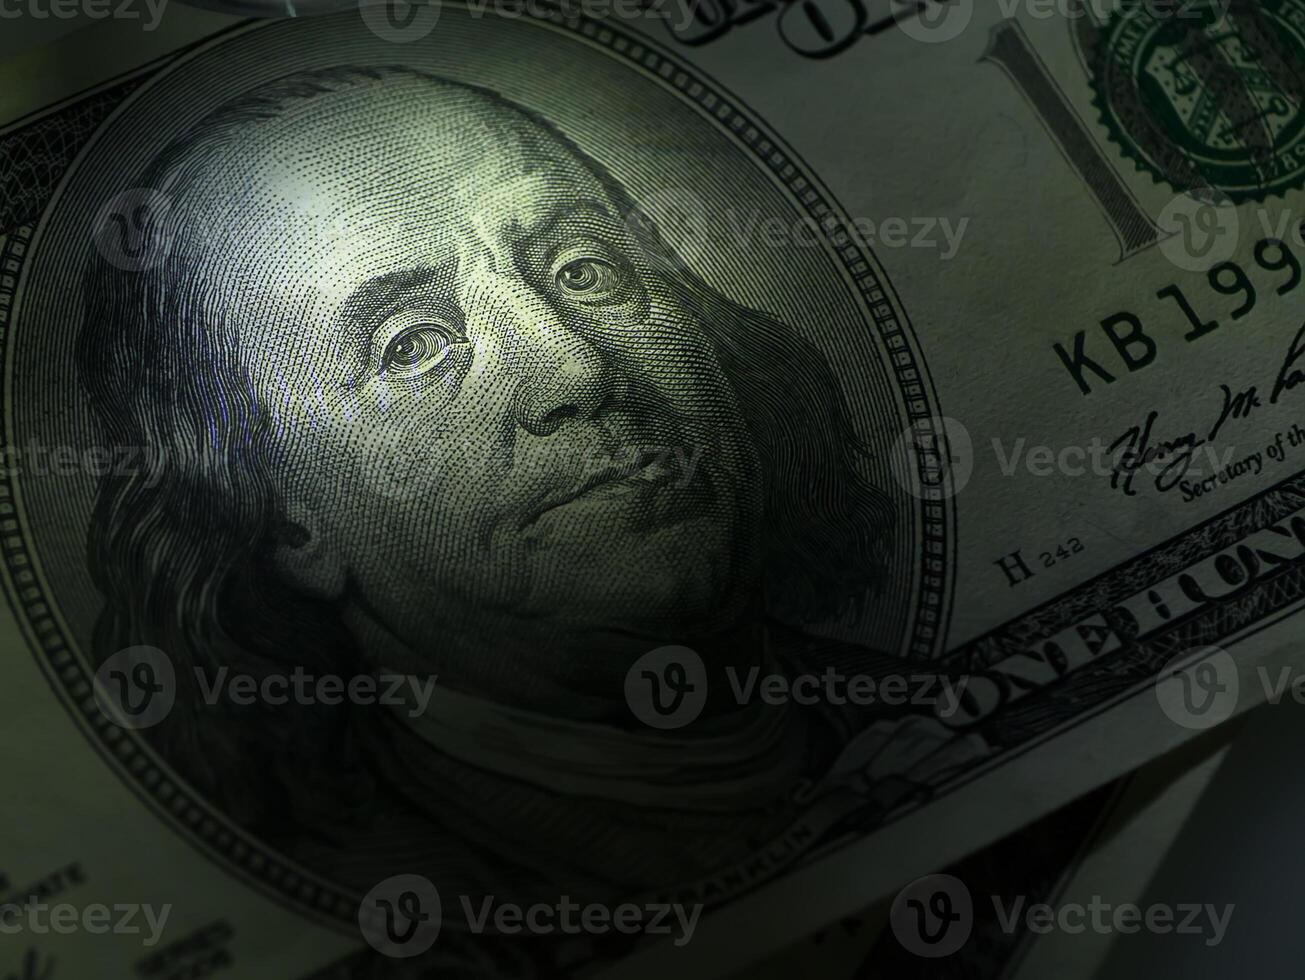 Low key image close up of face on dollar photo